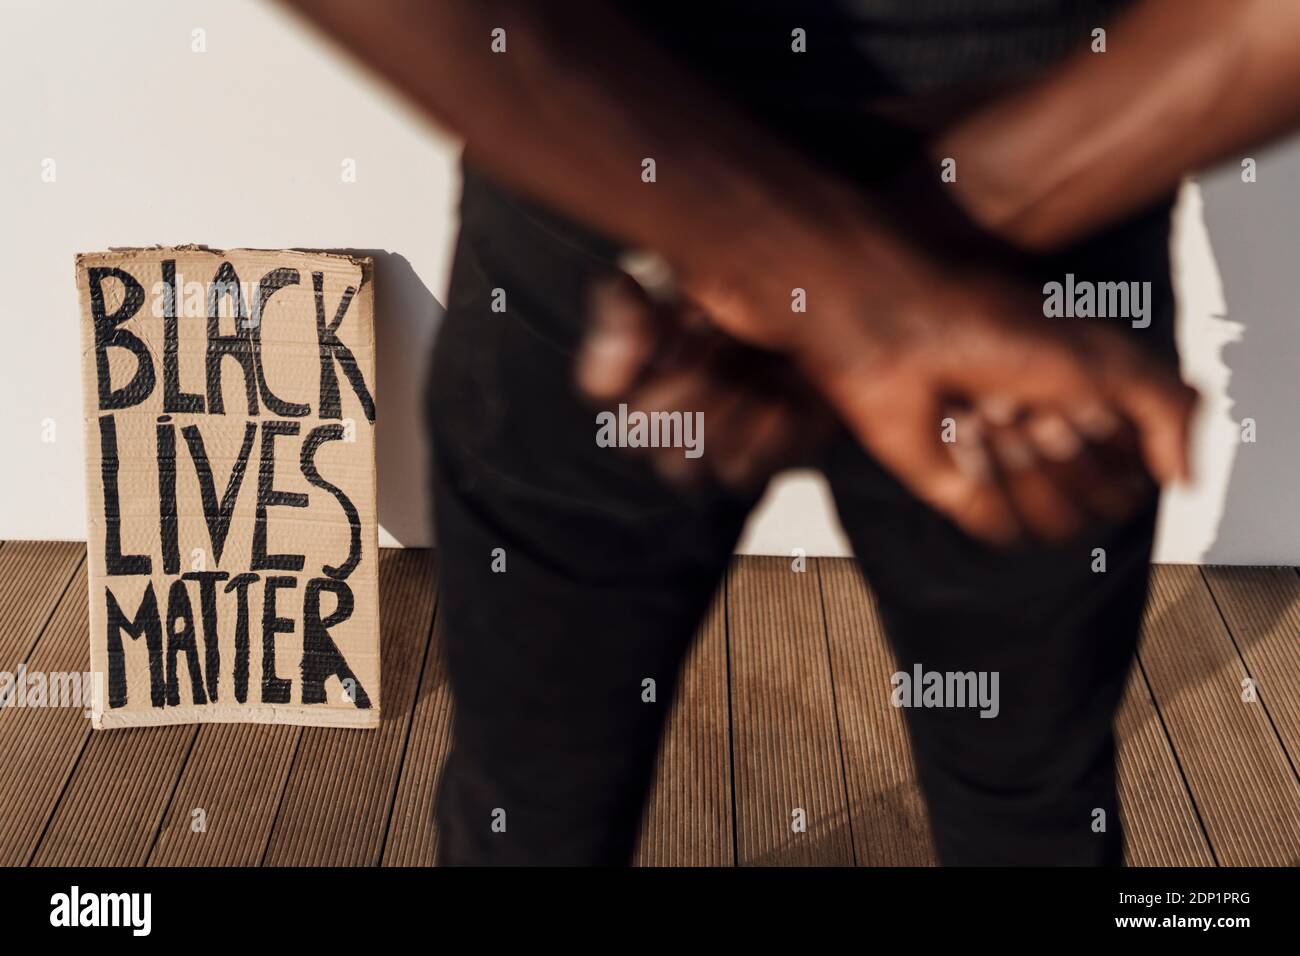 Black Lives Matter sign leaninig on wall, man crossing hands in foreground Stock Photo